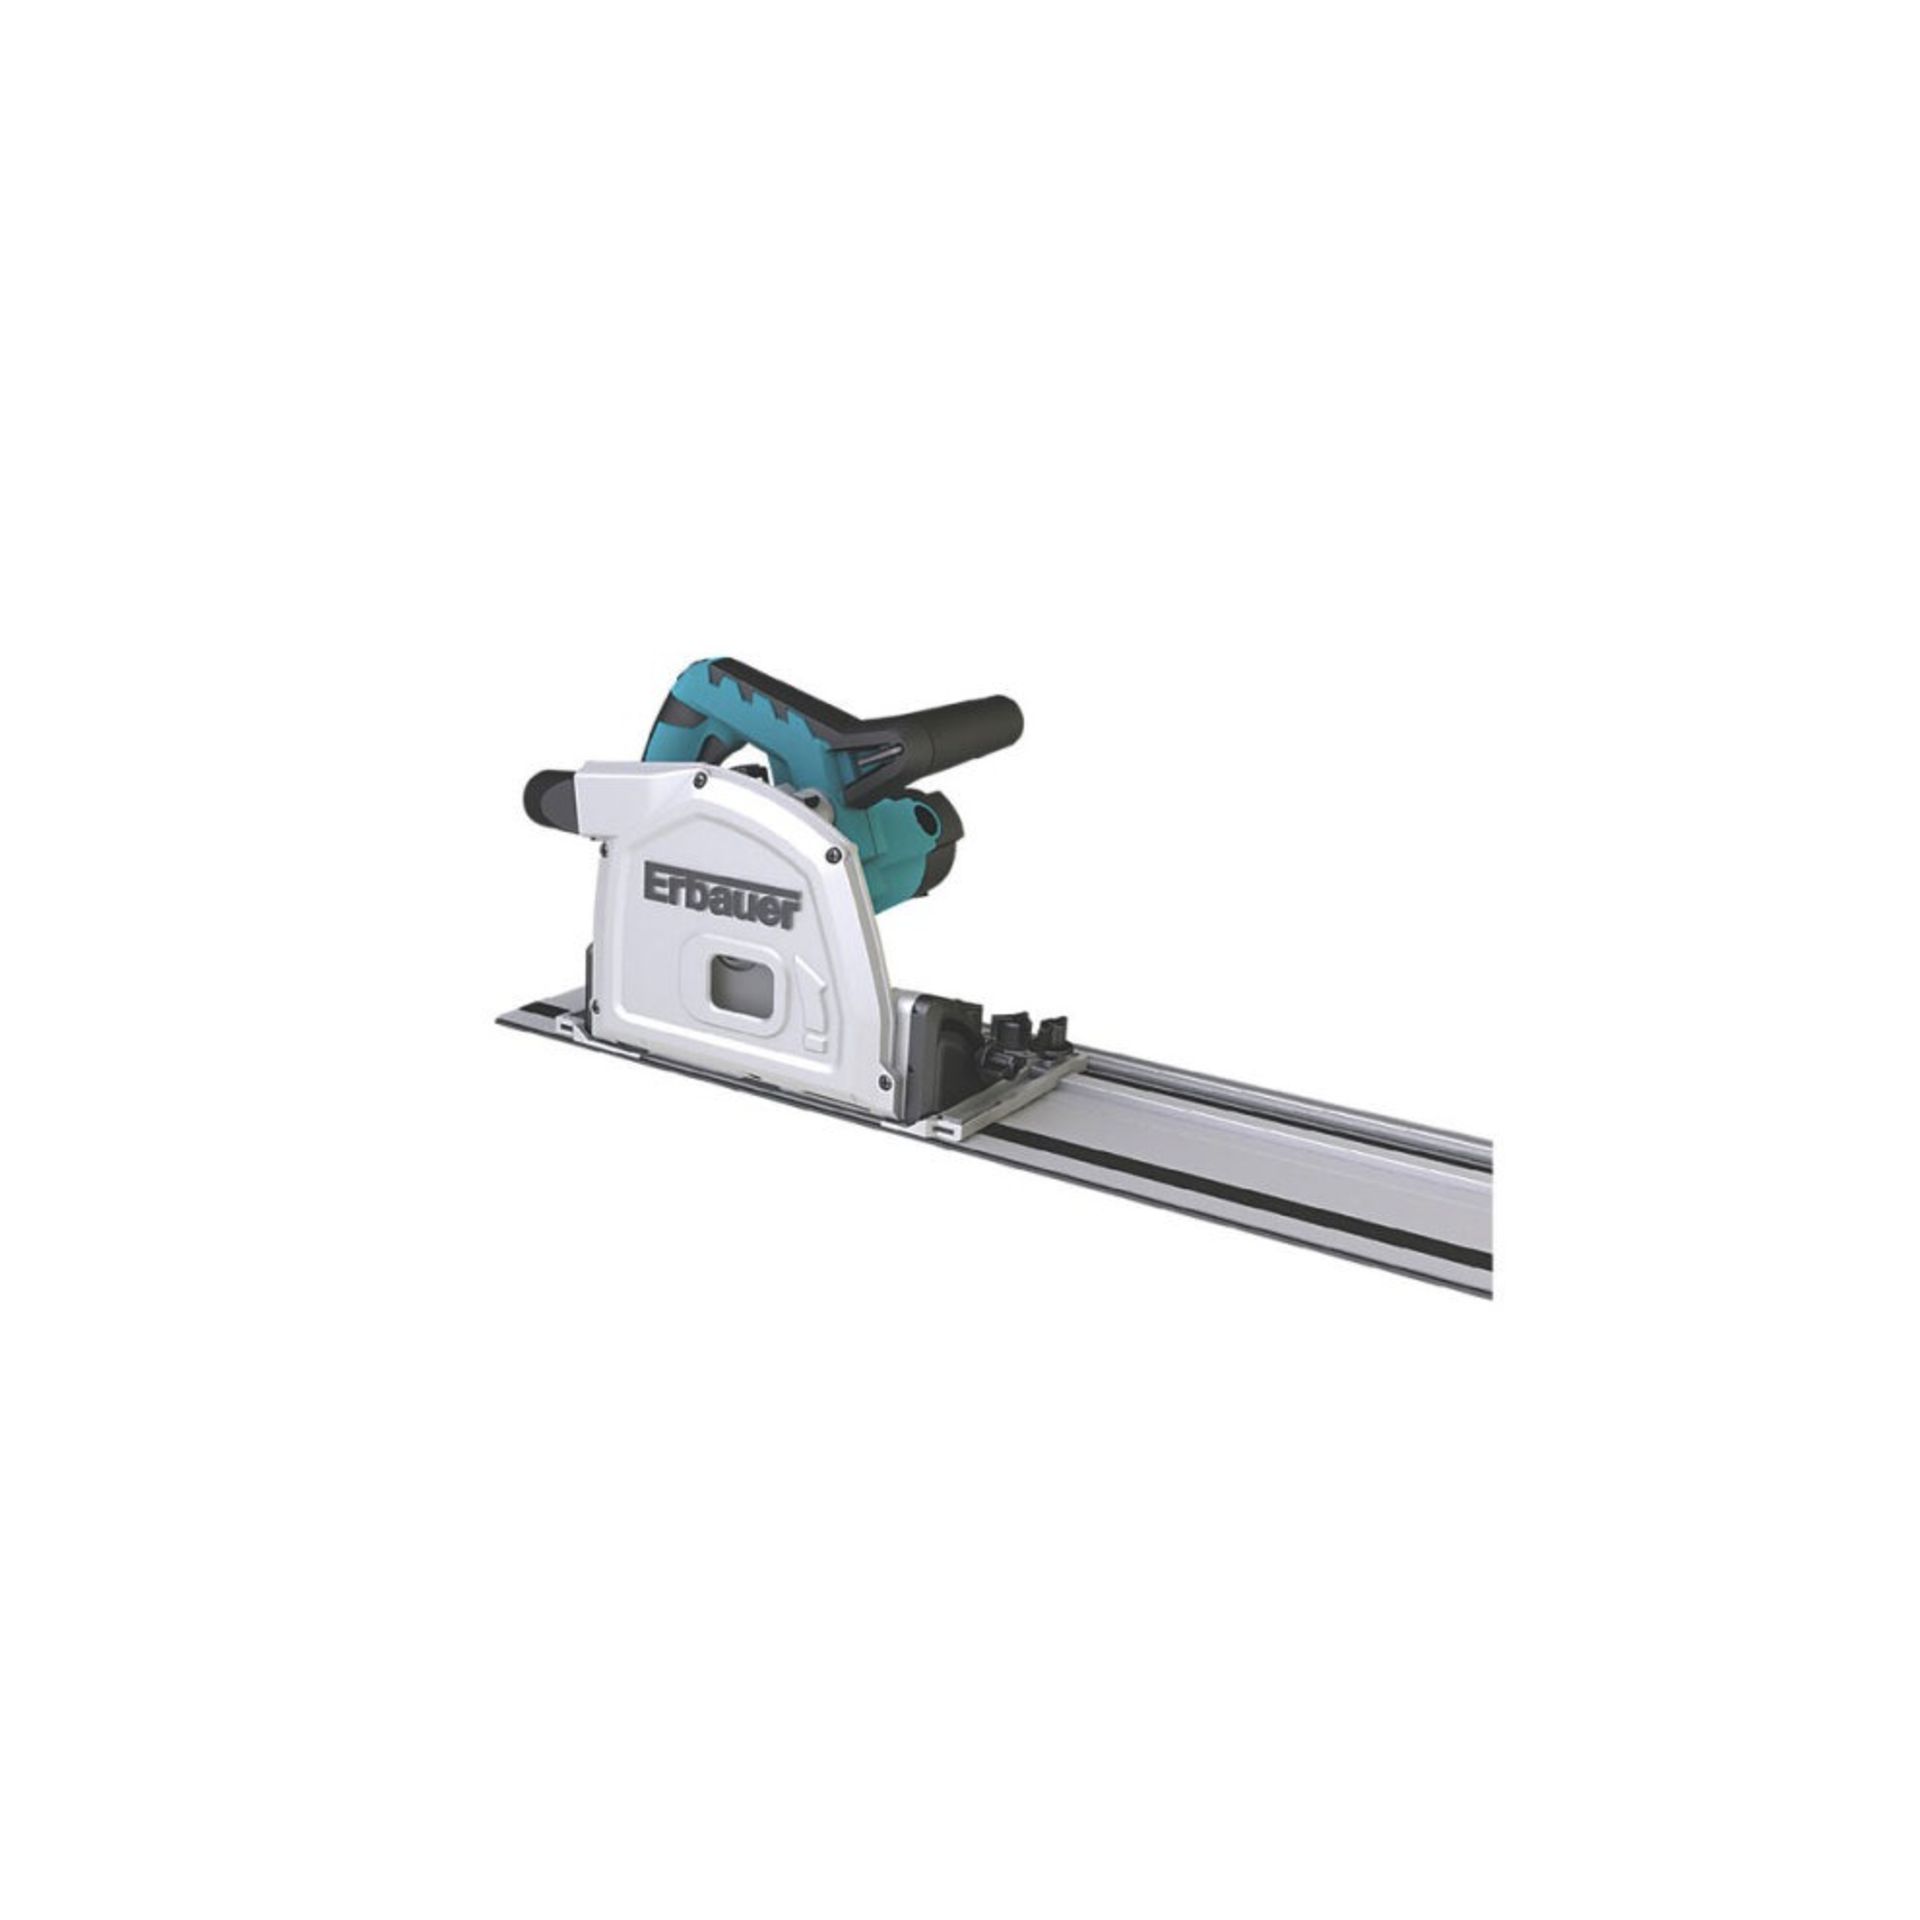 Erbauer Plunge Saw ERB690CSW Corded Electric - ER42